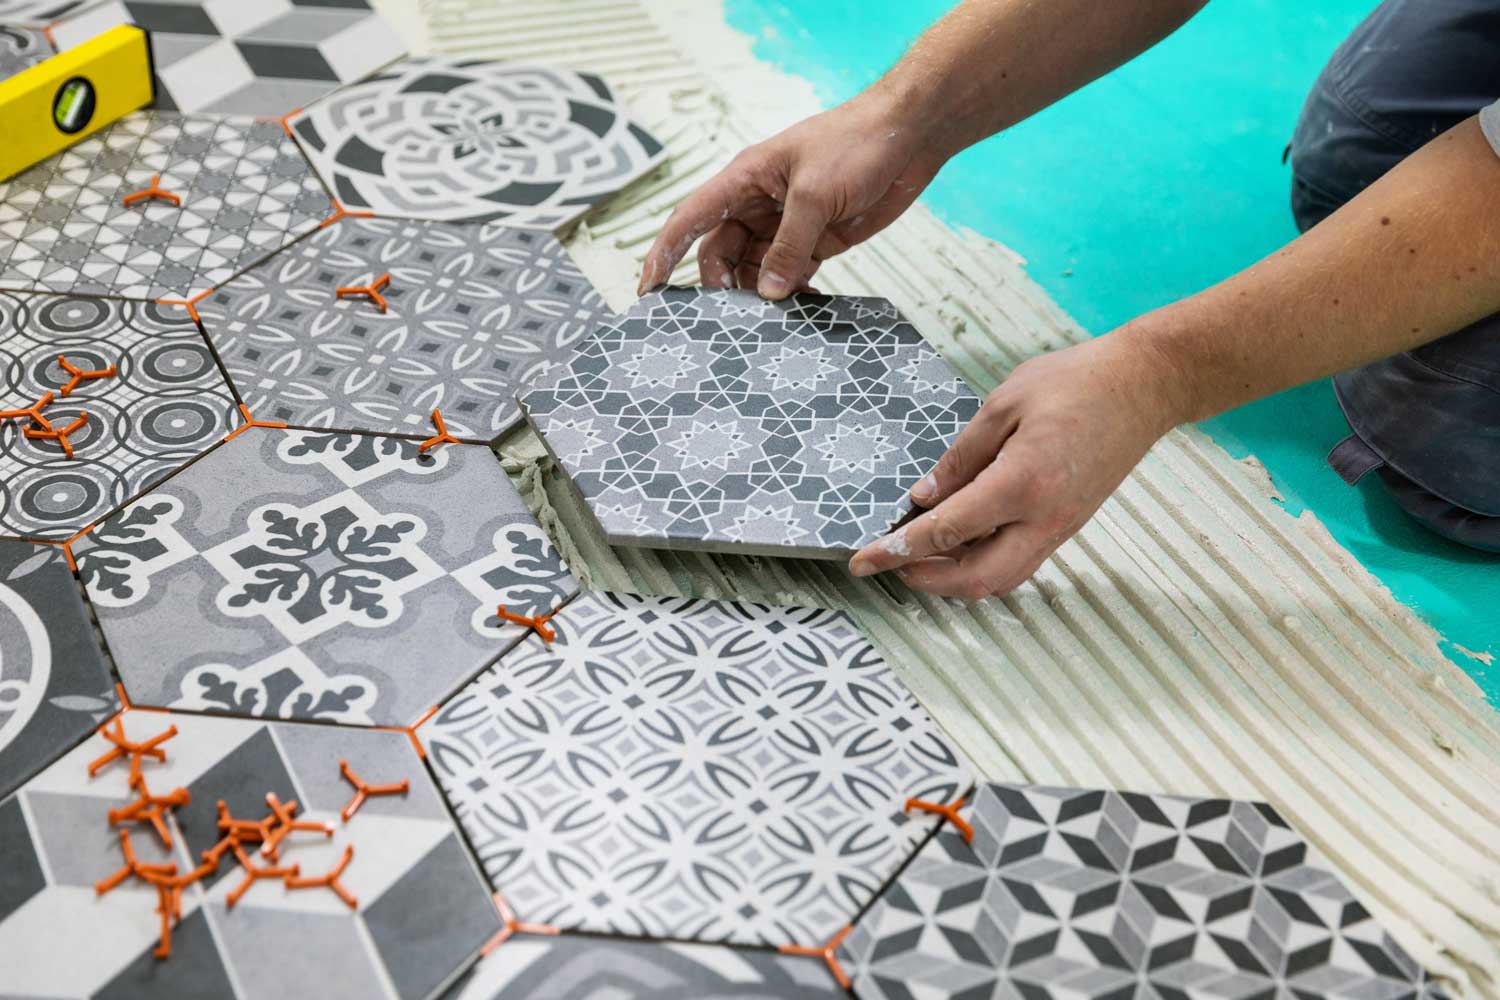 Our tile installation professionals in Denver will help bring your floors back to life.